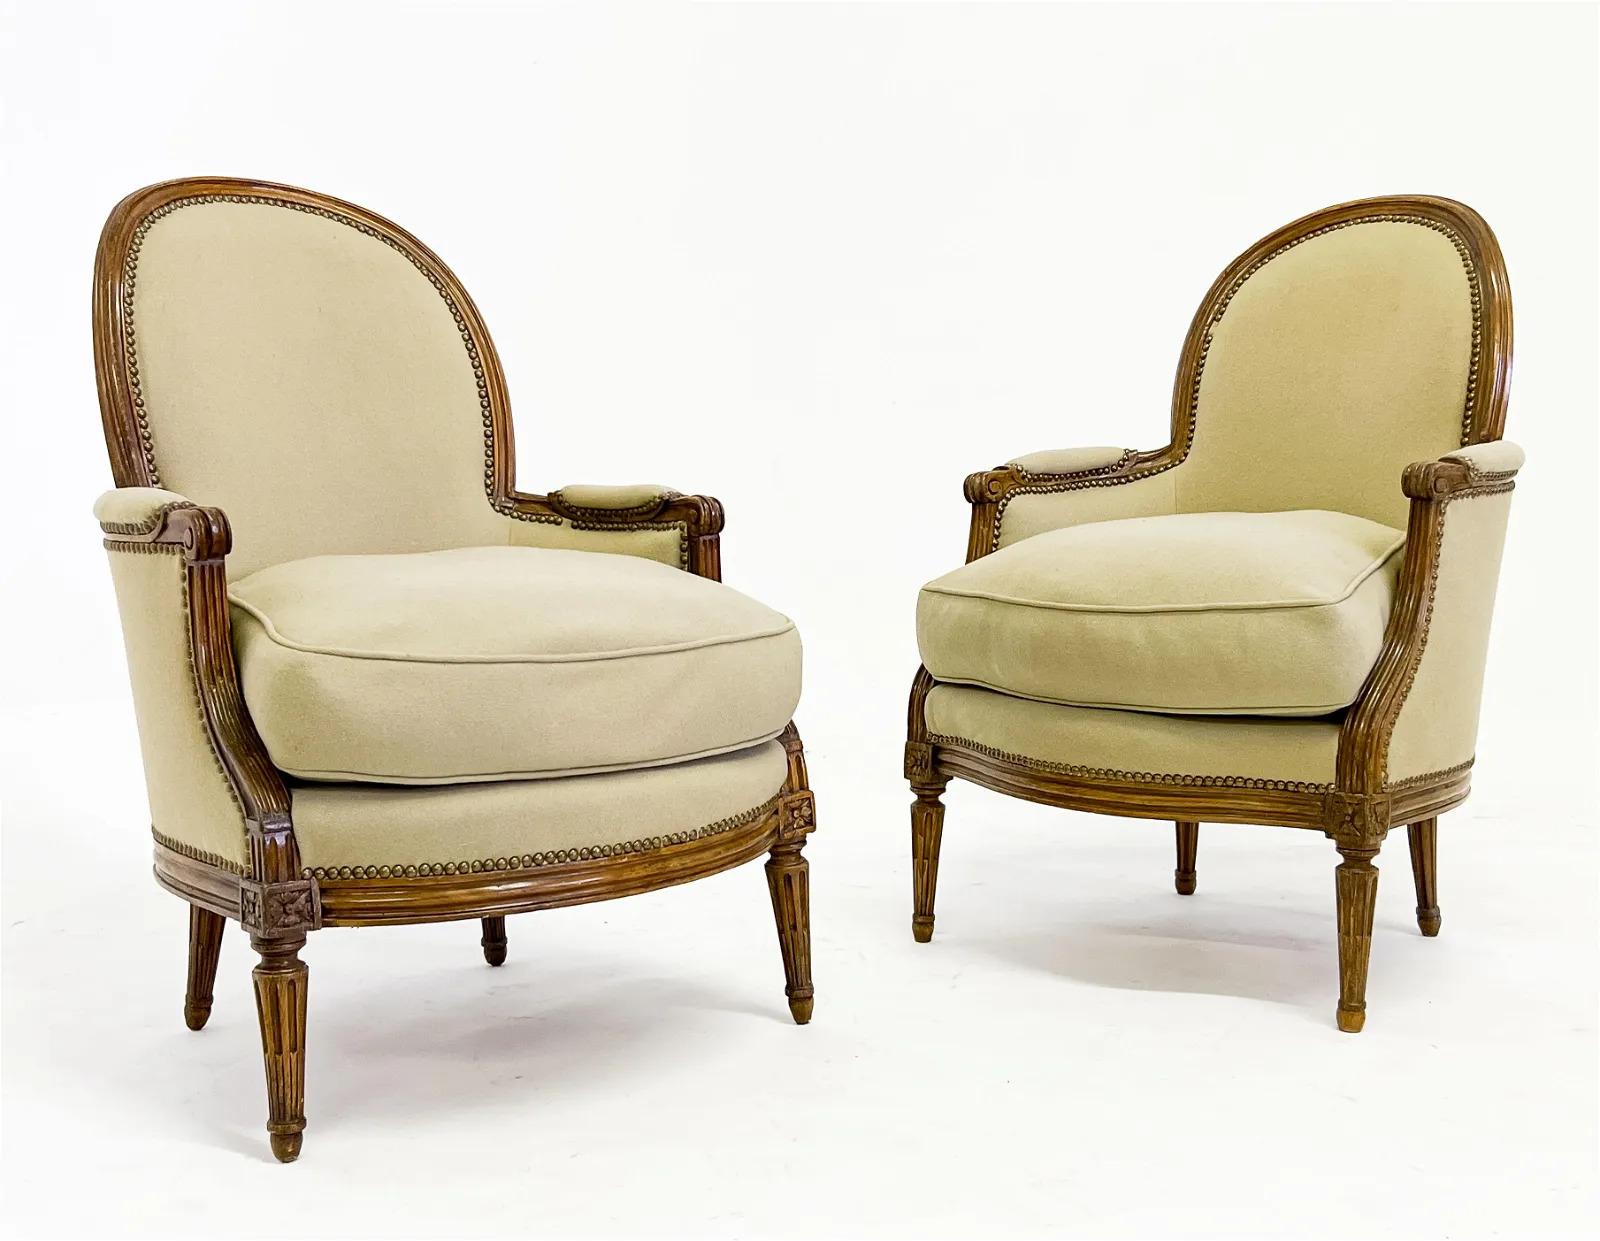 Pair of fine Louis XV Chevigny Stamped Bergères (late 18th century)
each with arched back and nailhead-trimmed upholstery, the frame with rosette details and raised on tapered fluted legs, underside stamped CHEVIGNY (Claude Chevigny, French, maitre